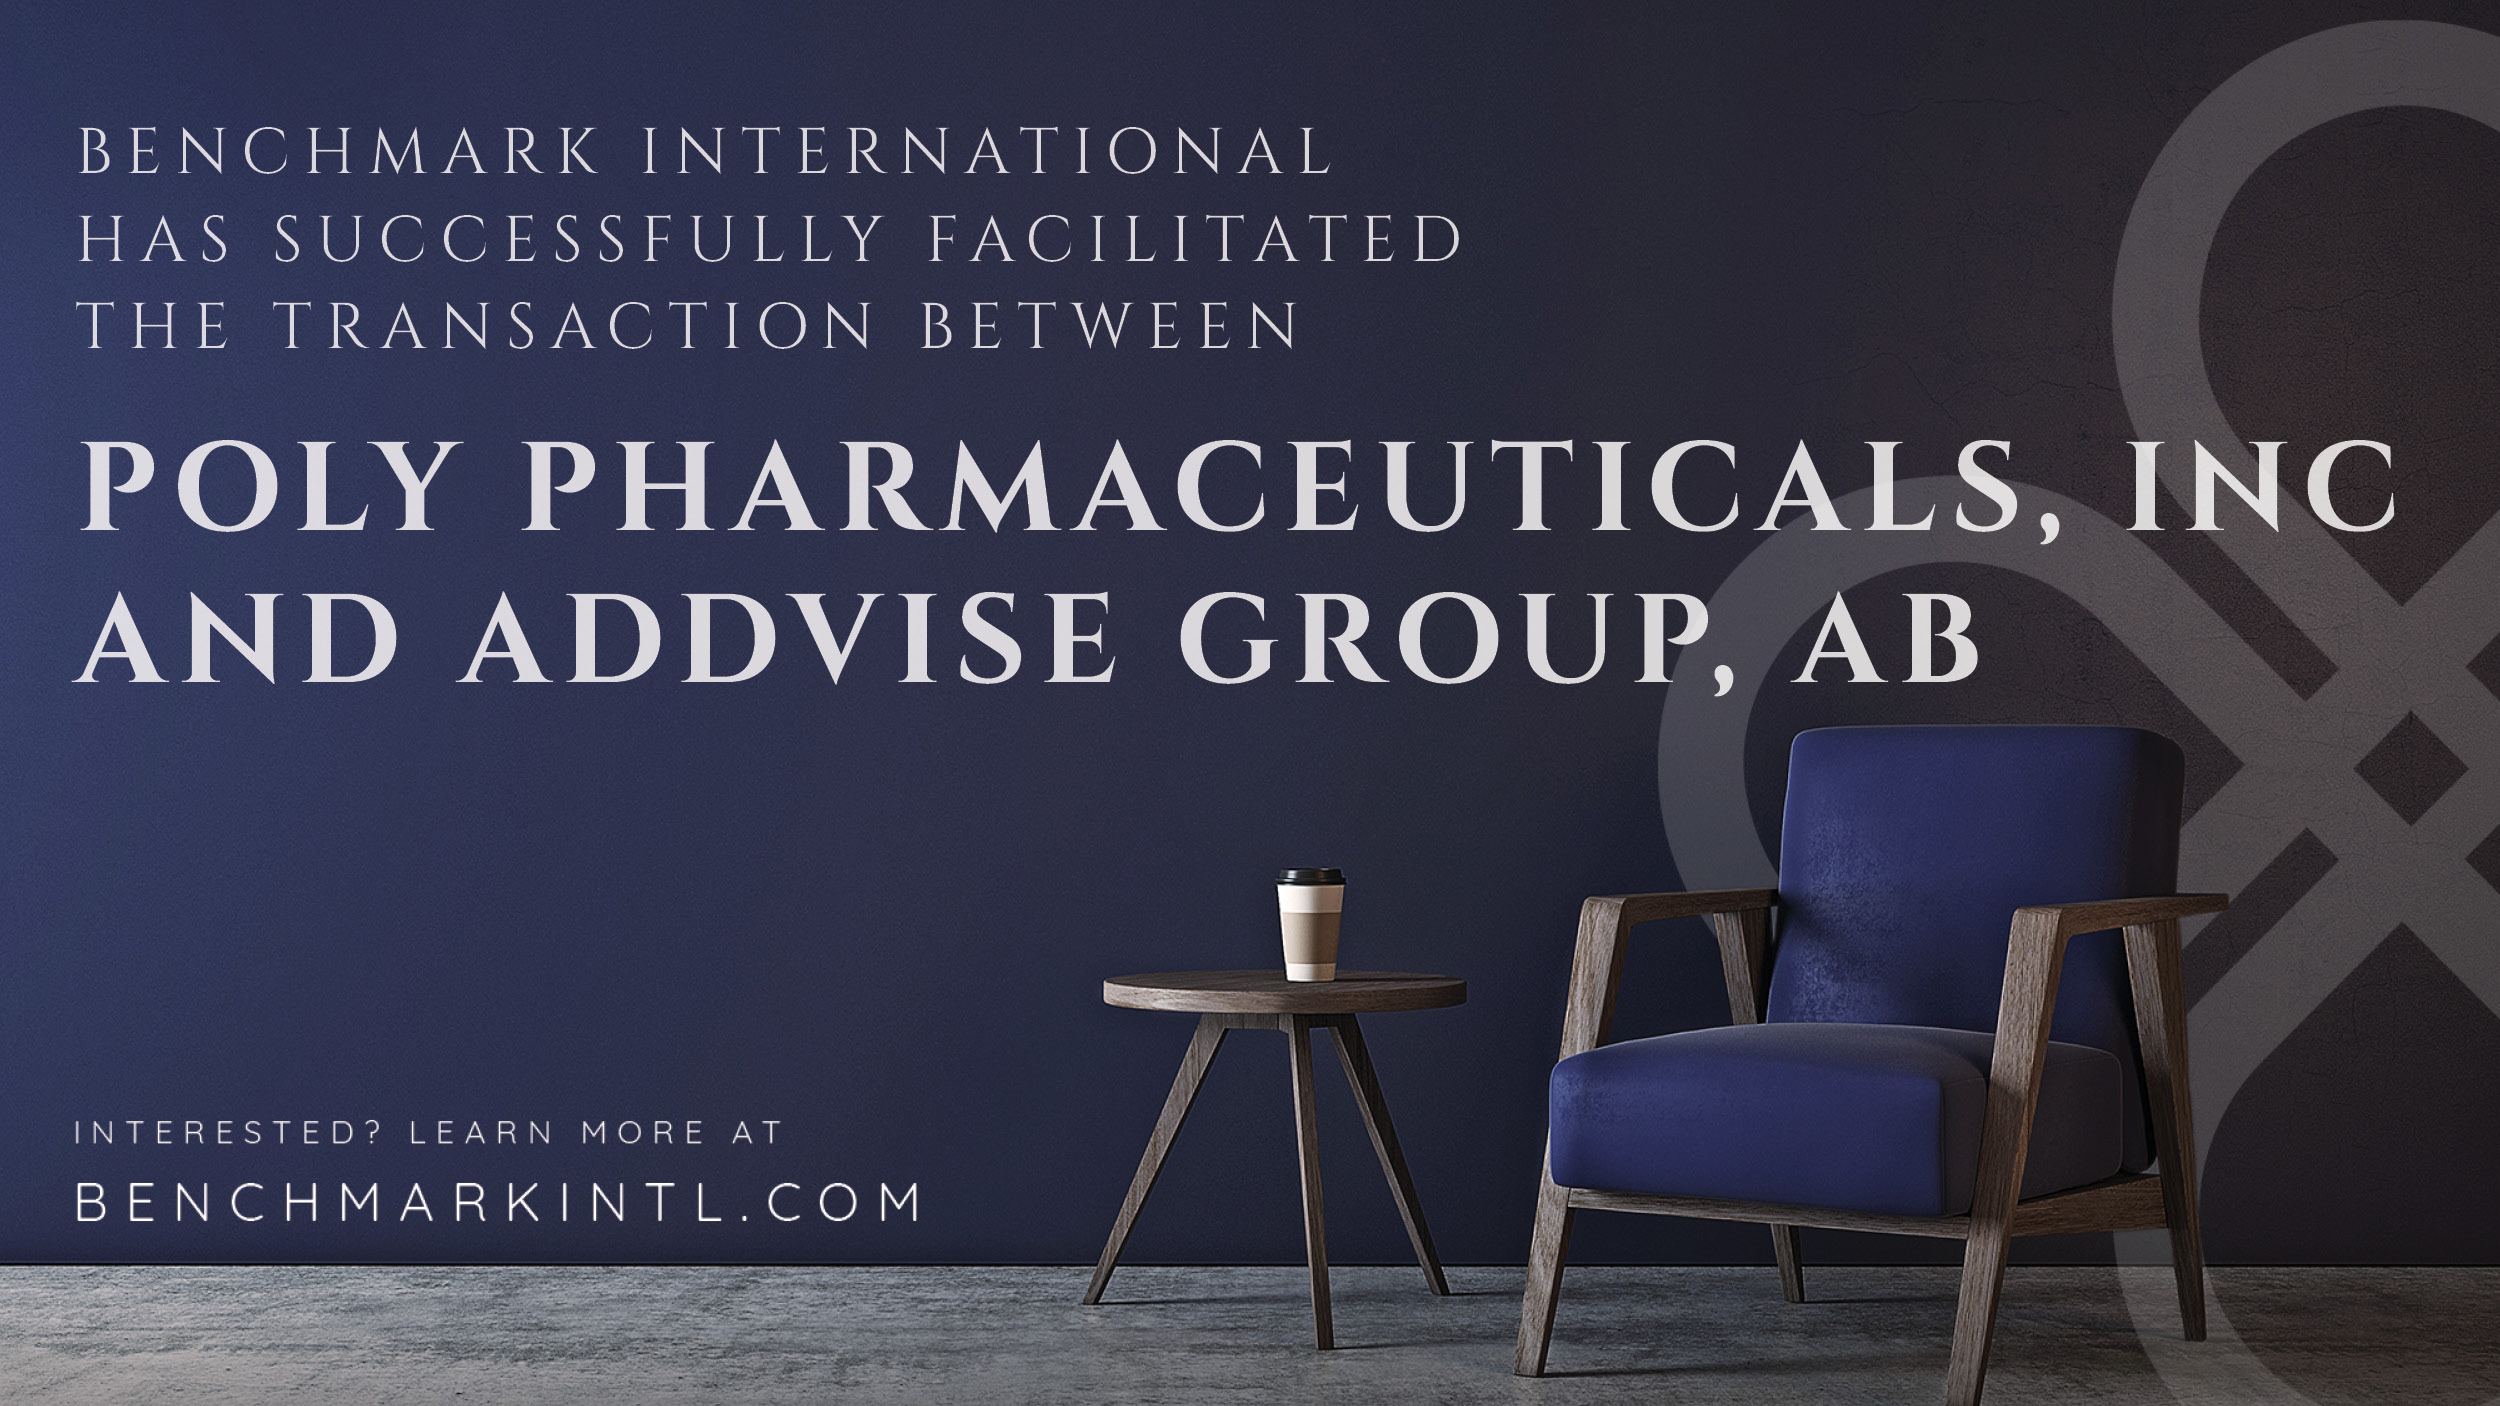 Benchmark International Successfully Facilitated the Transaction Between Poly Pharmaceuticals, Inc. and ADDvise Group, AB